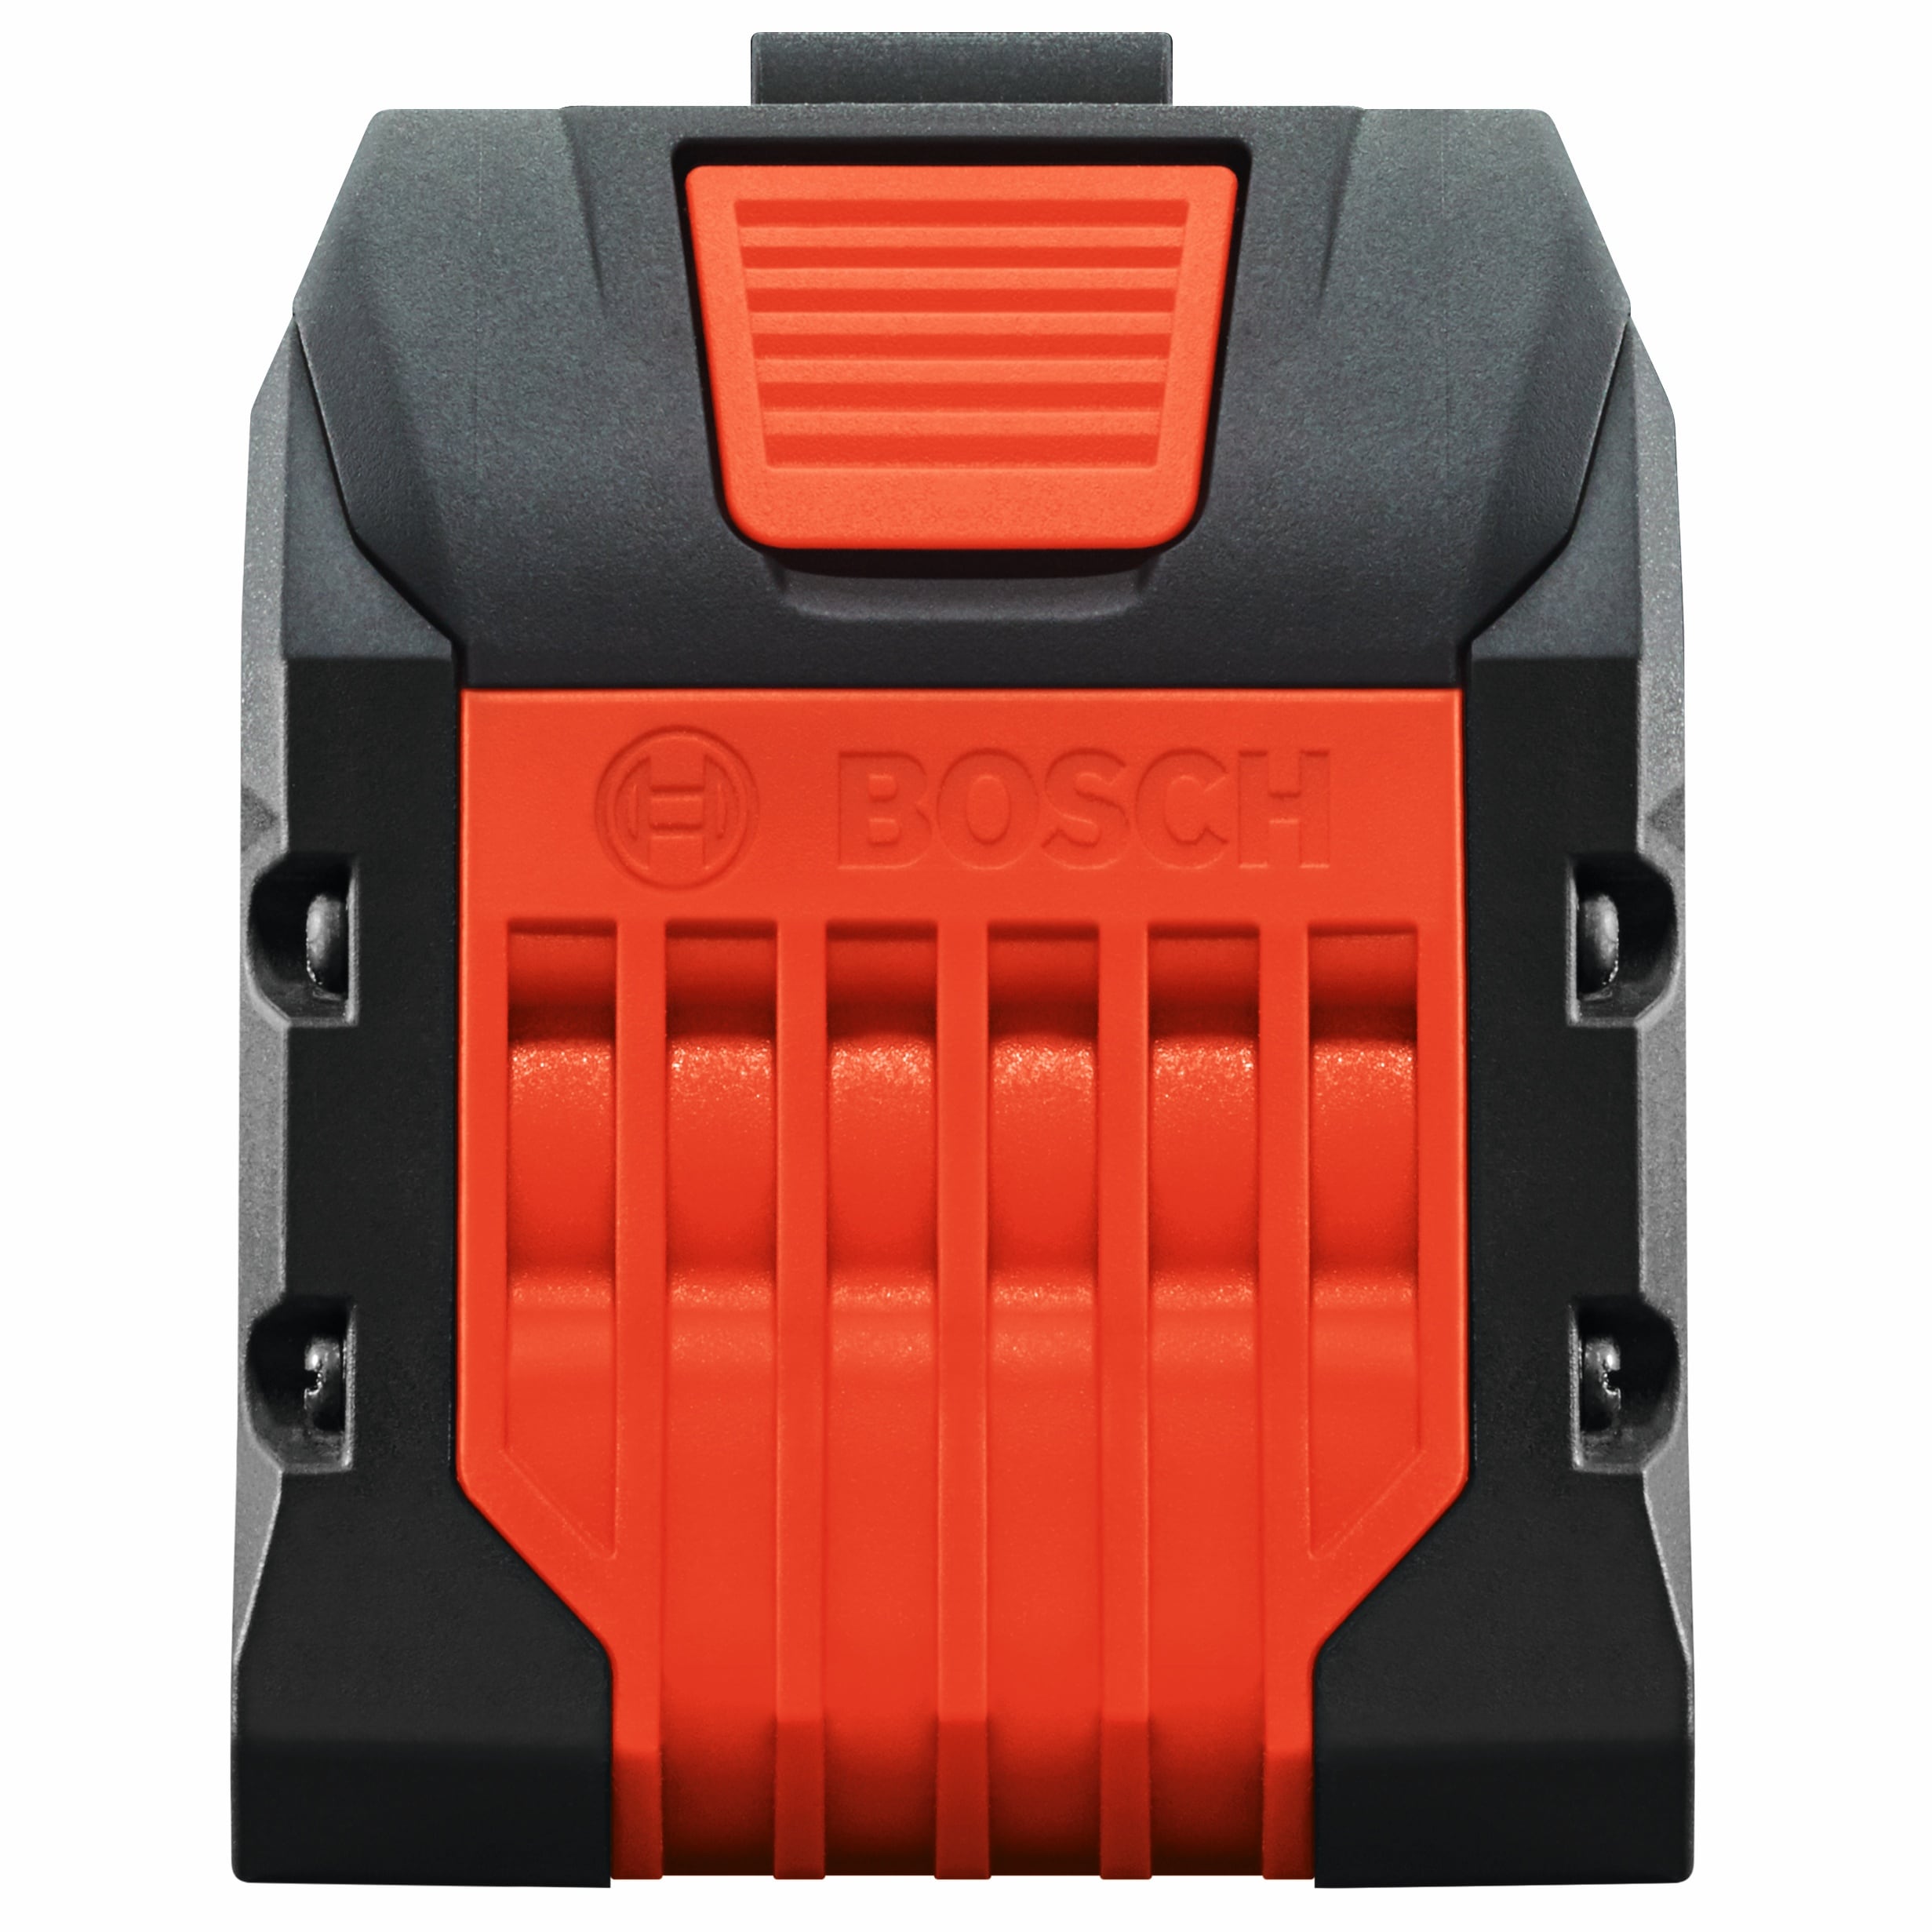 department 18-V the at Amp-Hour; PROFACTOR Bosch Lithium & in Battery 12 Batteries Chargers Power Tool